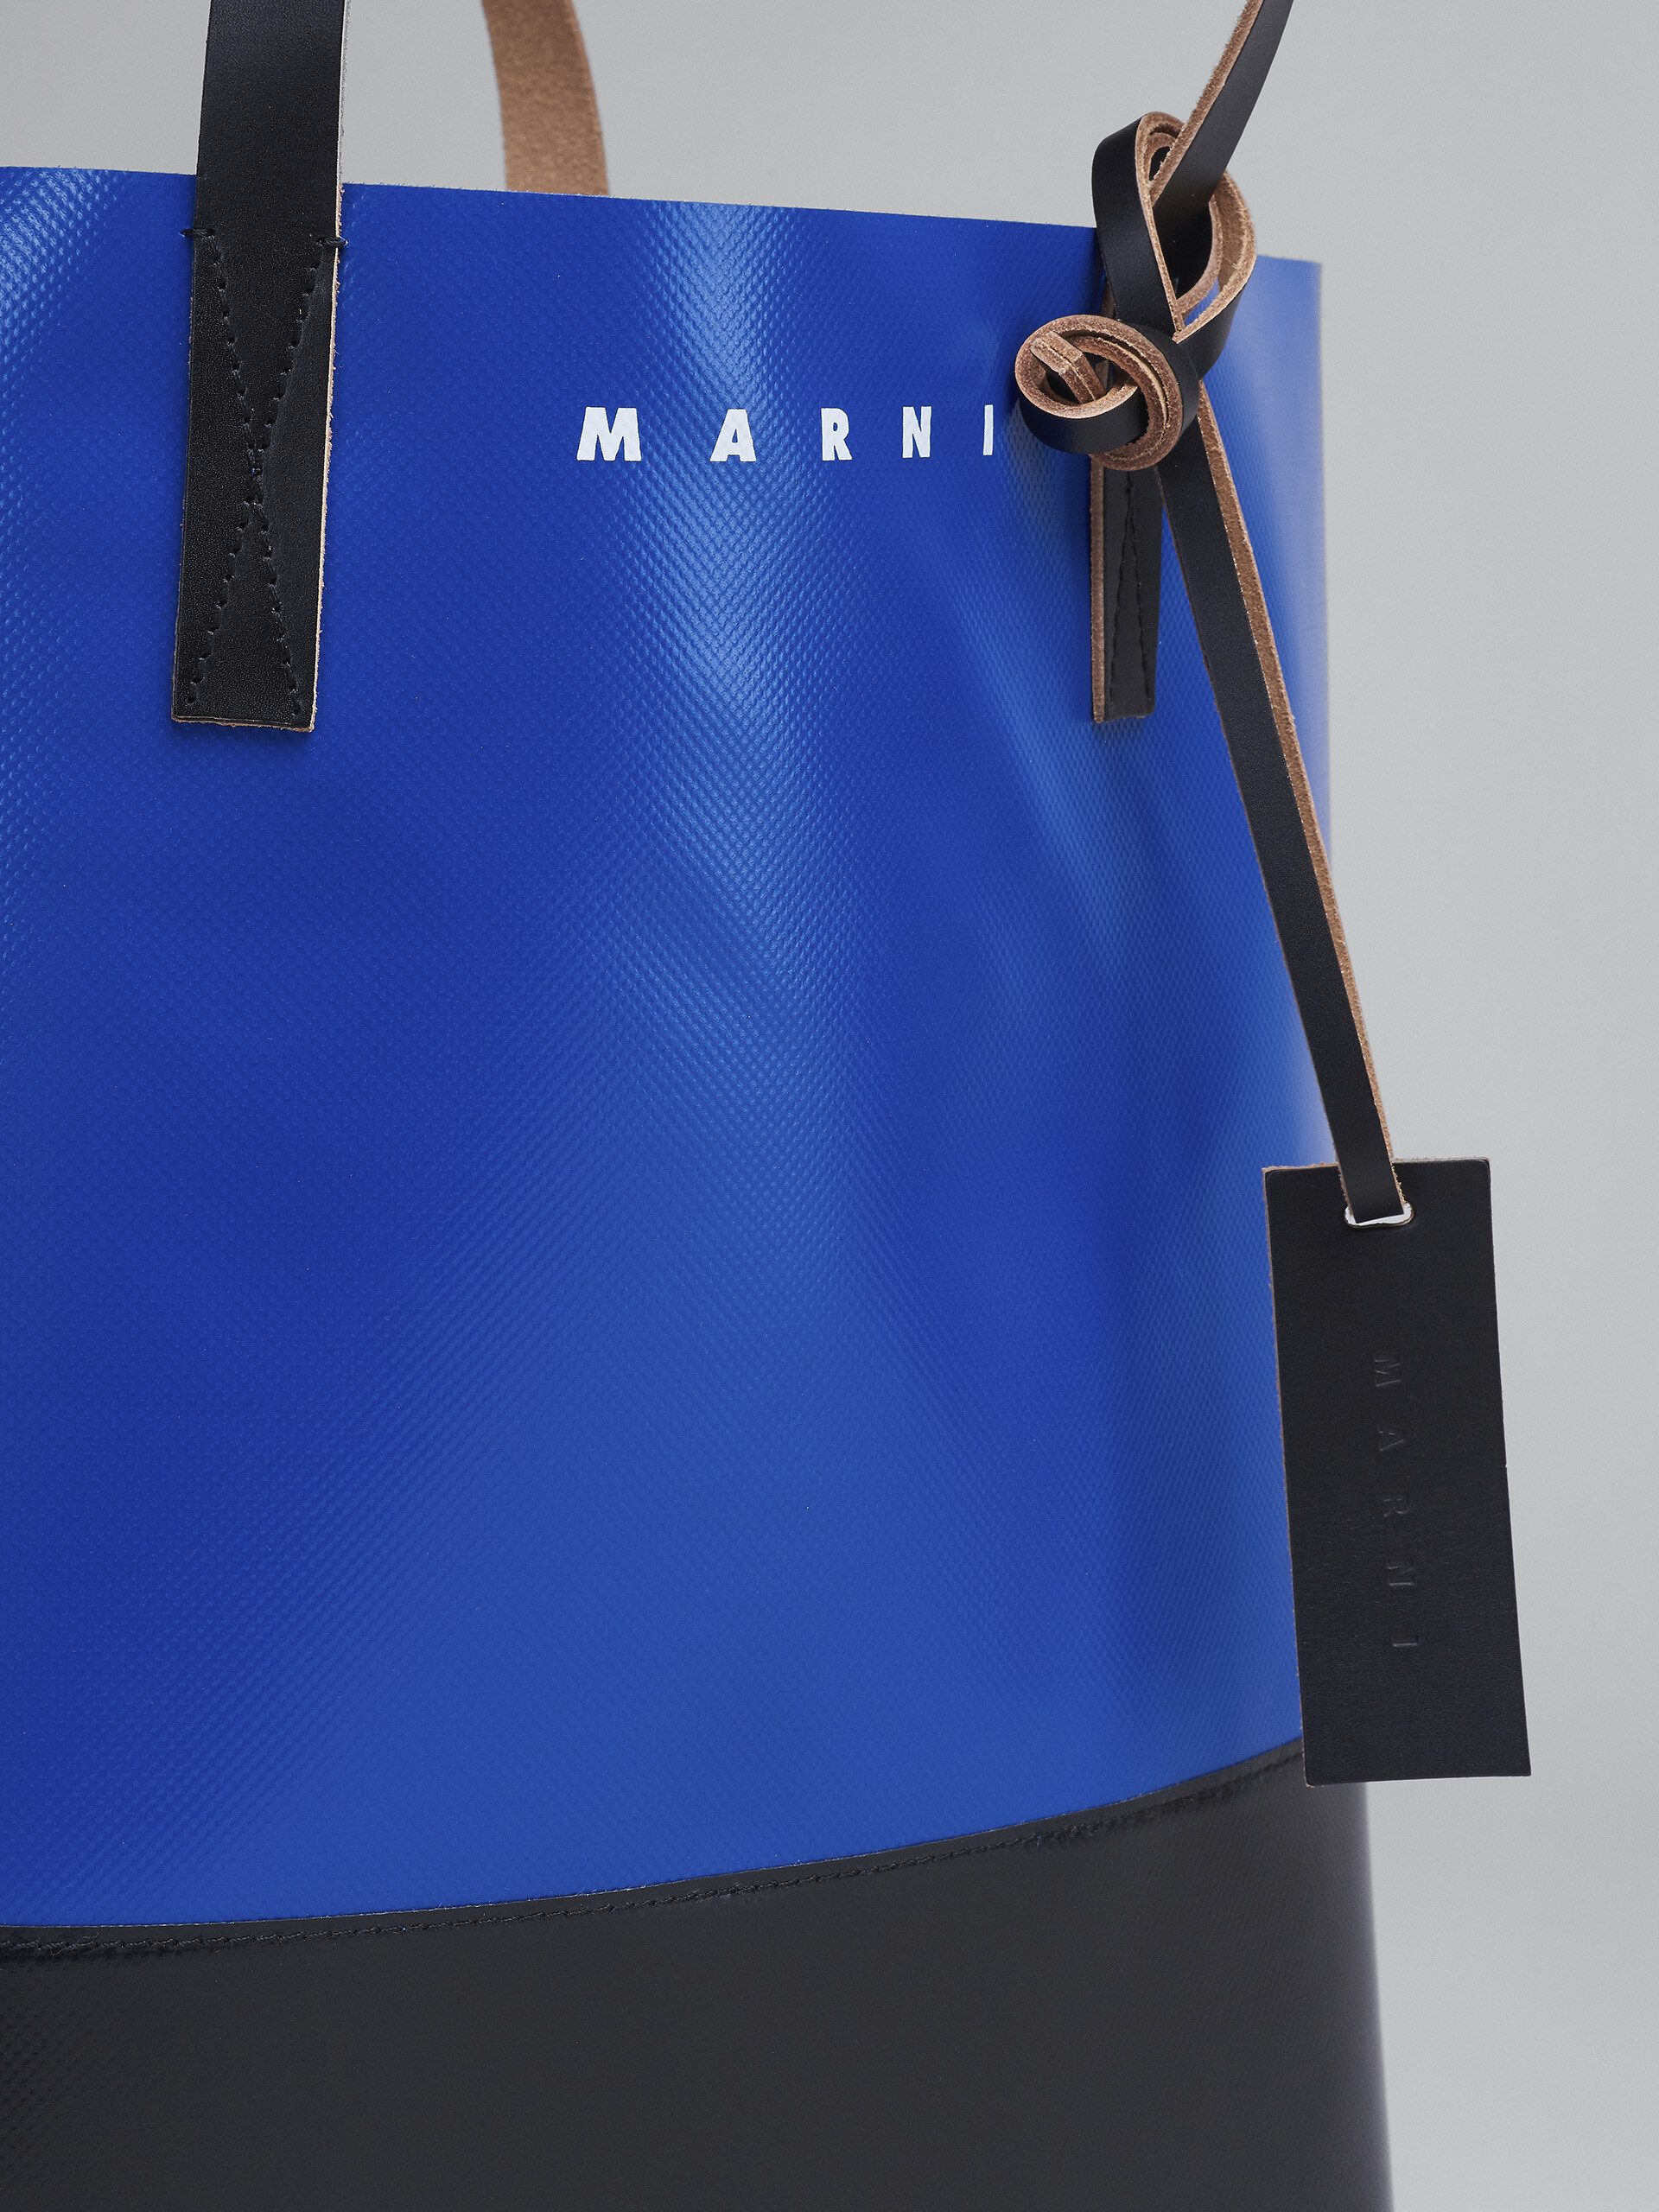 Blue and black TRIBECA shopping bag - Shopping Bags - Image 5